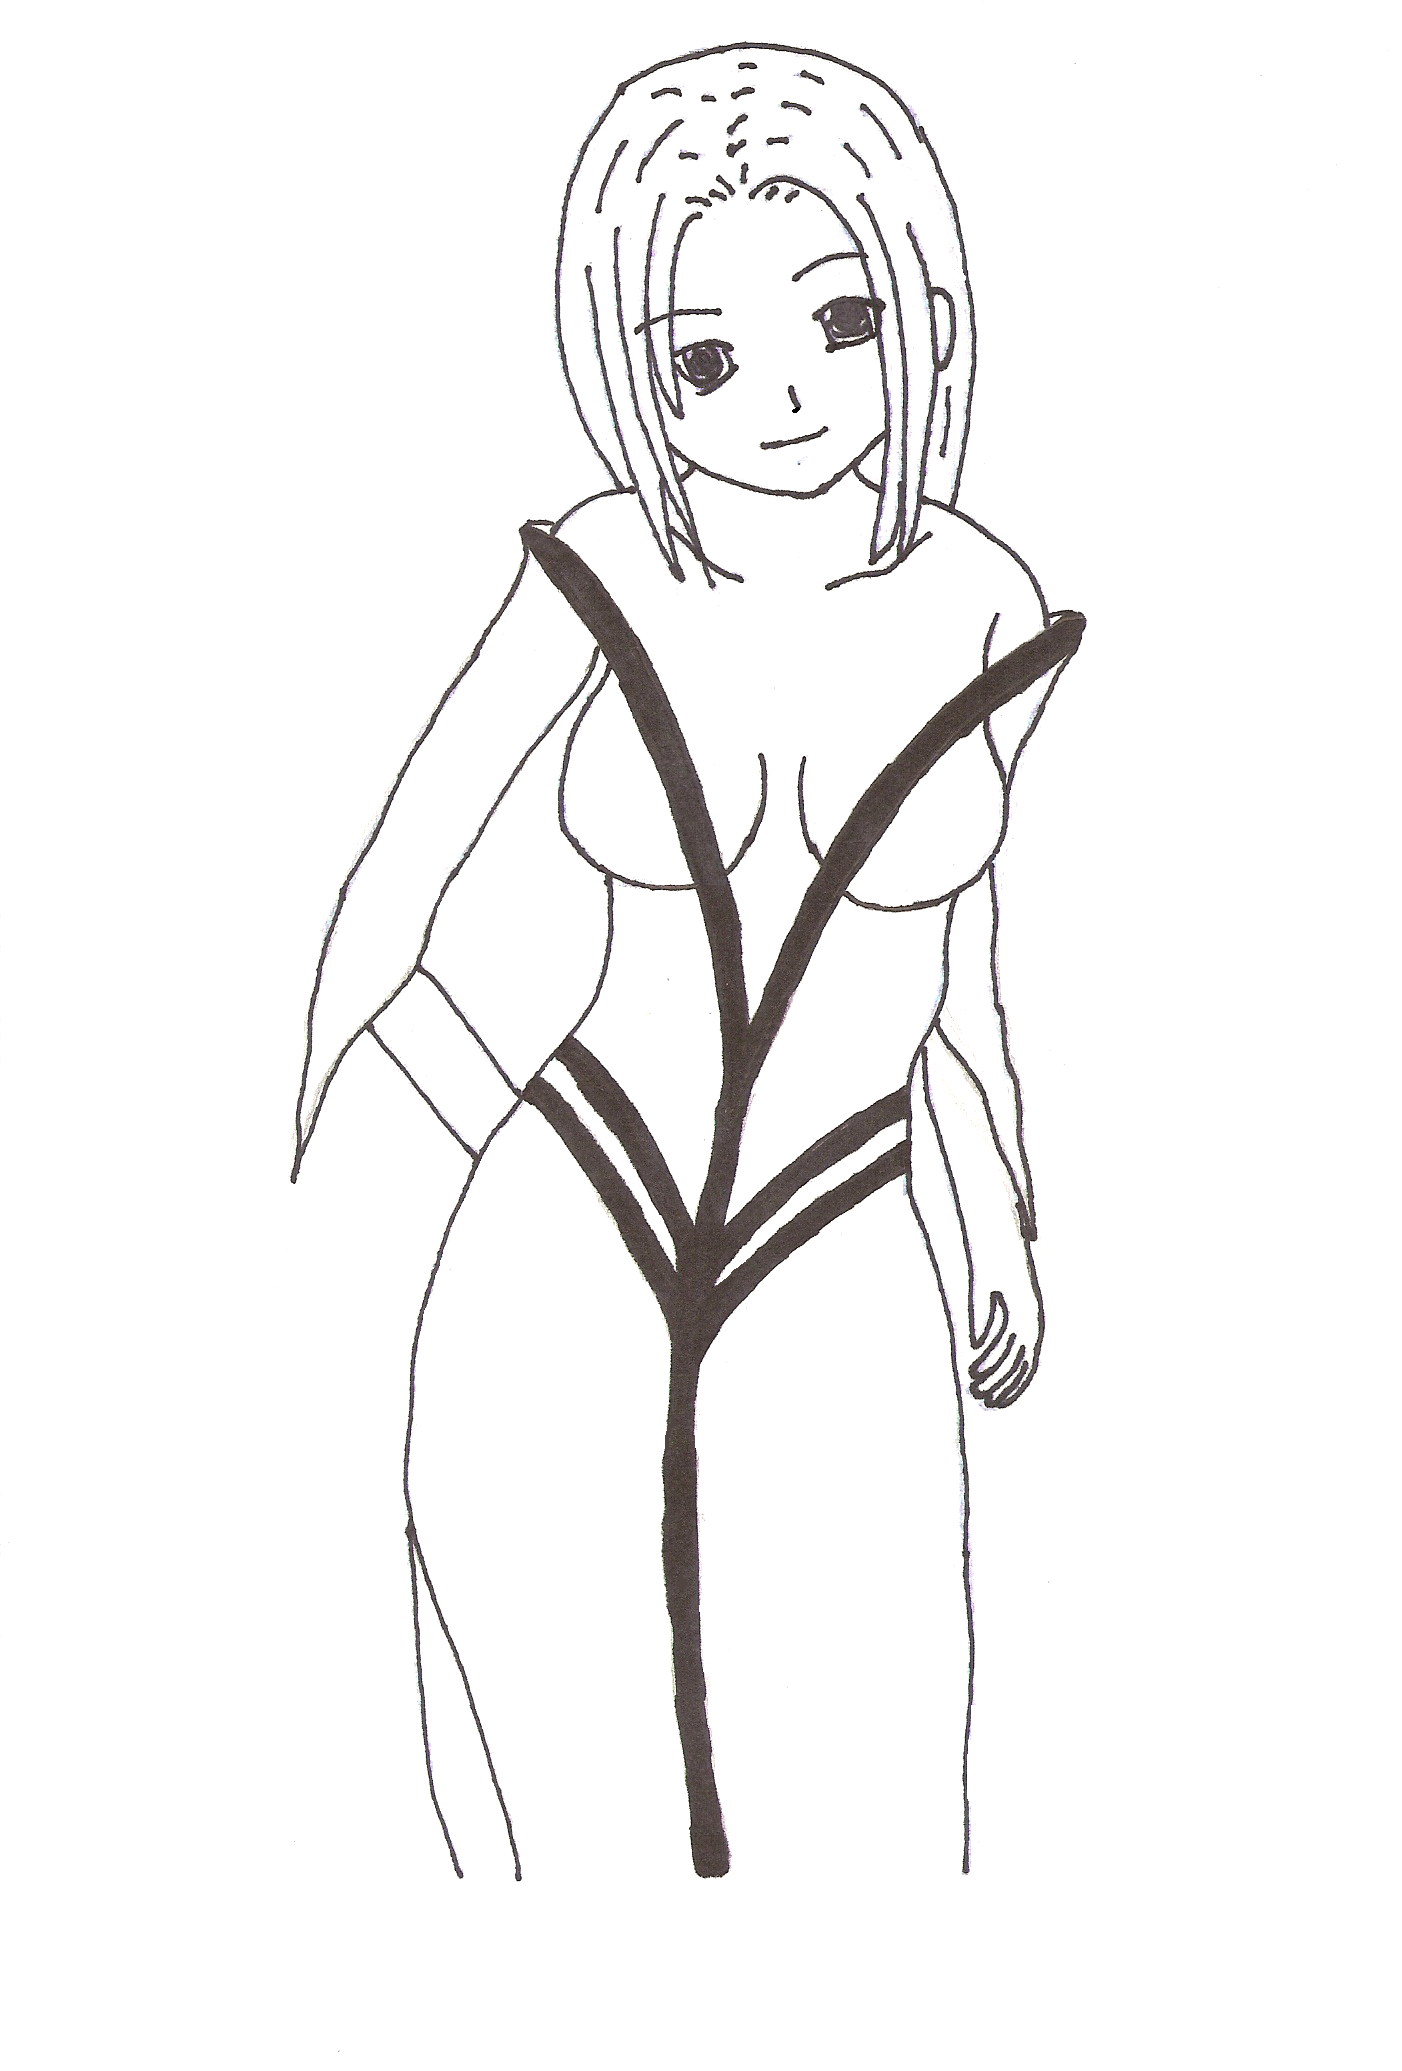 Estelle Concept (Uncolored) by forevereternal09